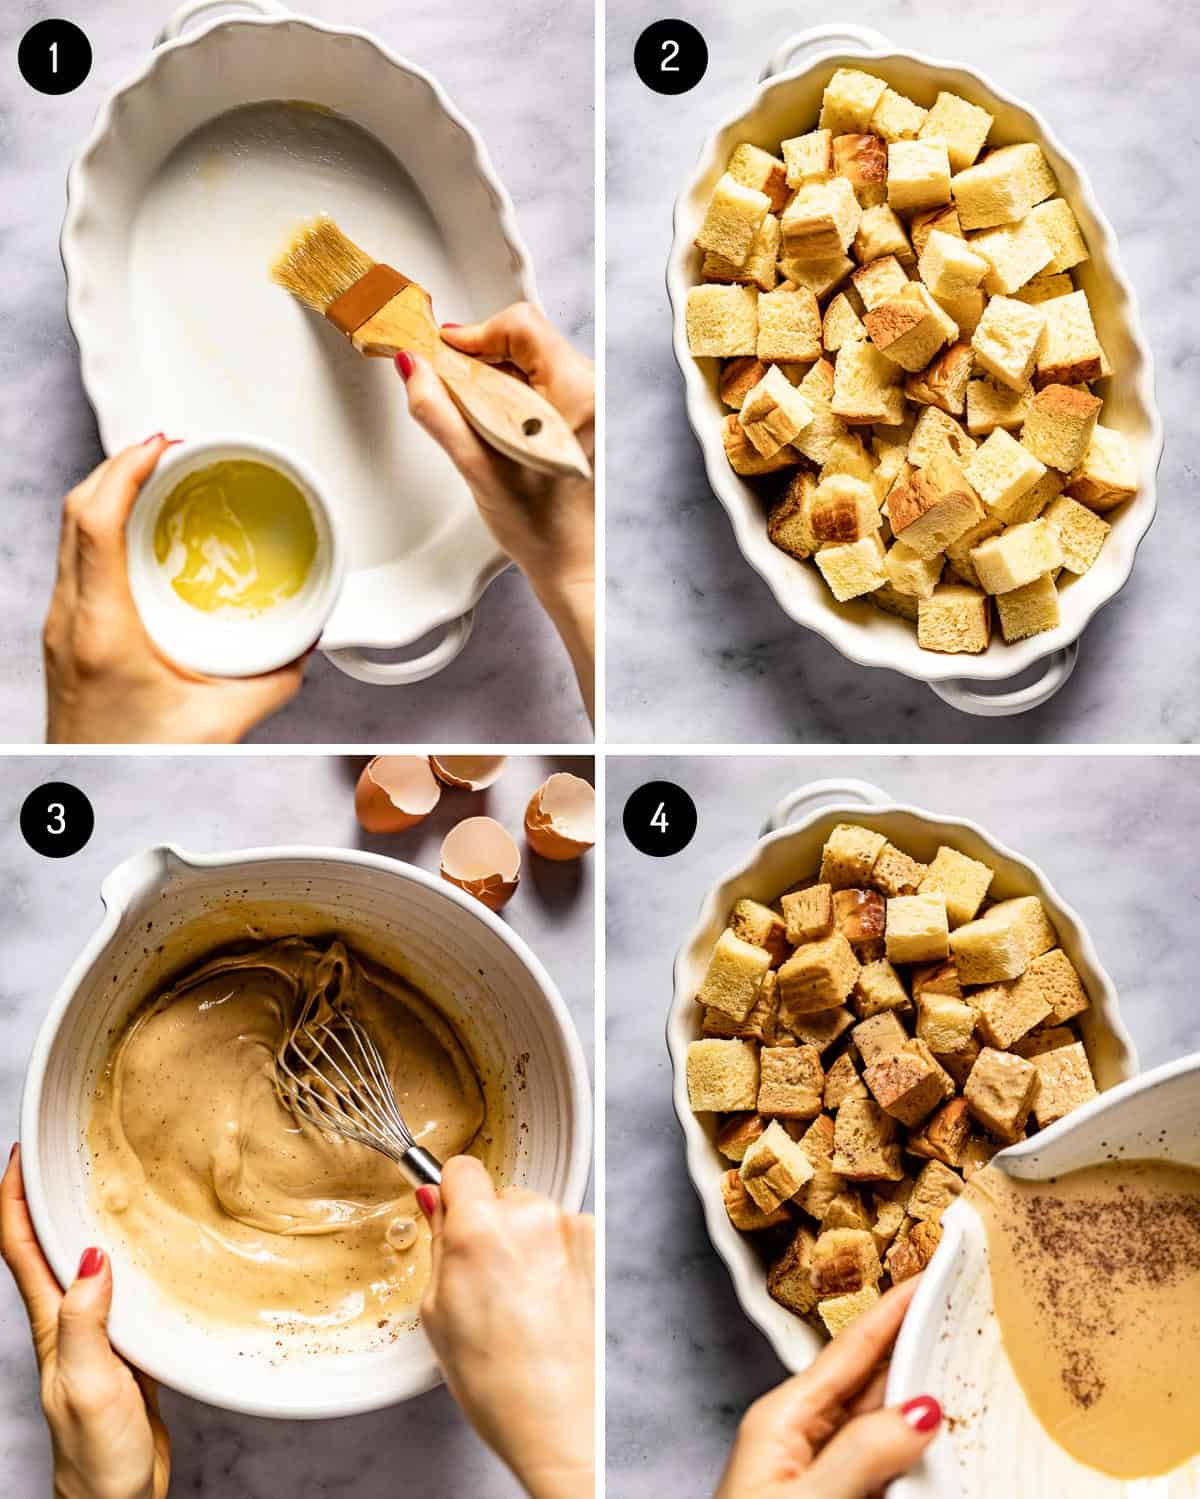 Four images showing how to prepare a casserole with cubed brioche bread. 